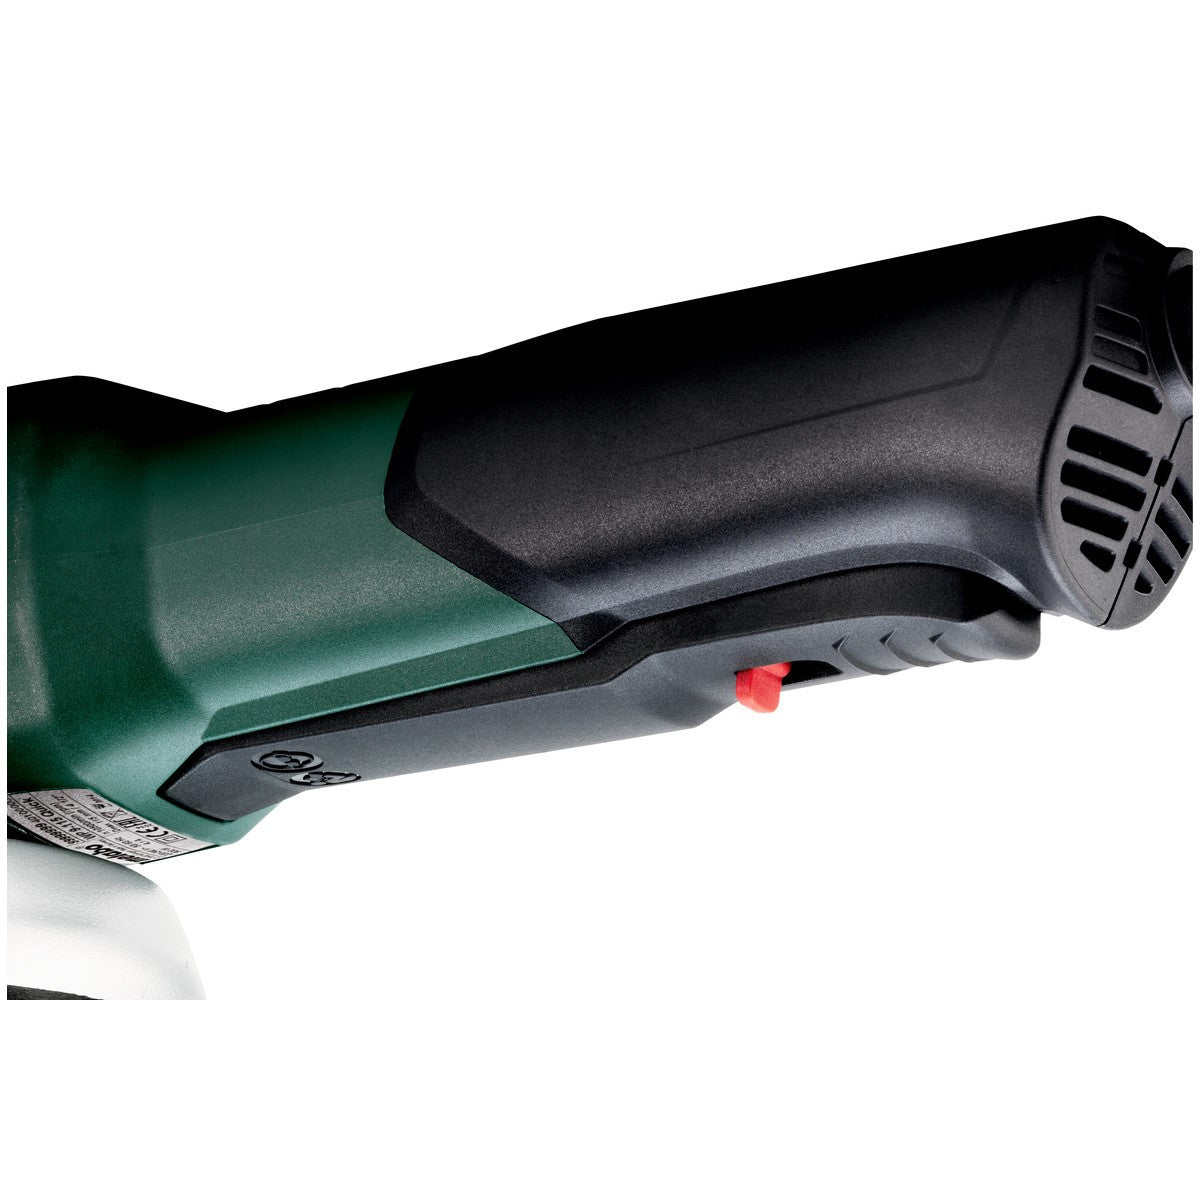 Fasteners Plus (603629420) Non-Lock – Switch Metabo Grinder w/ 5\